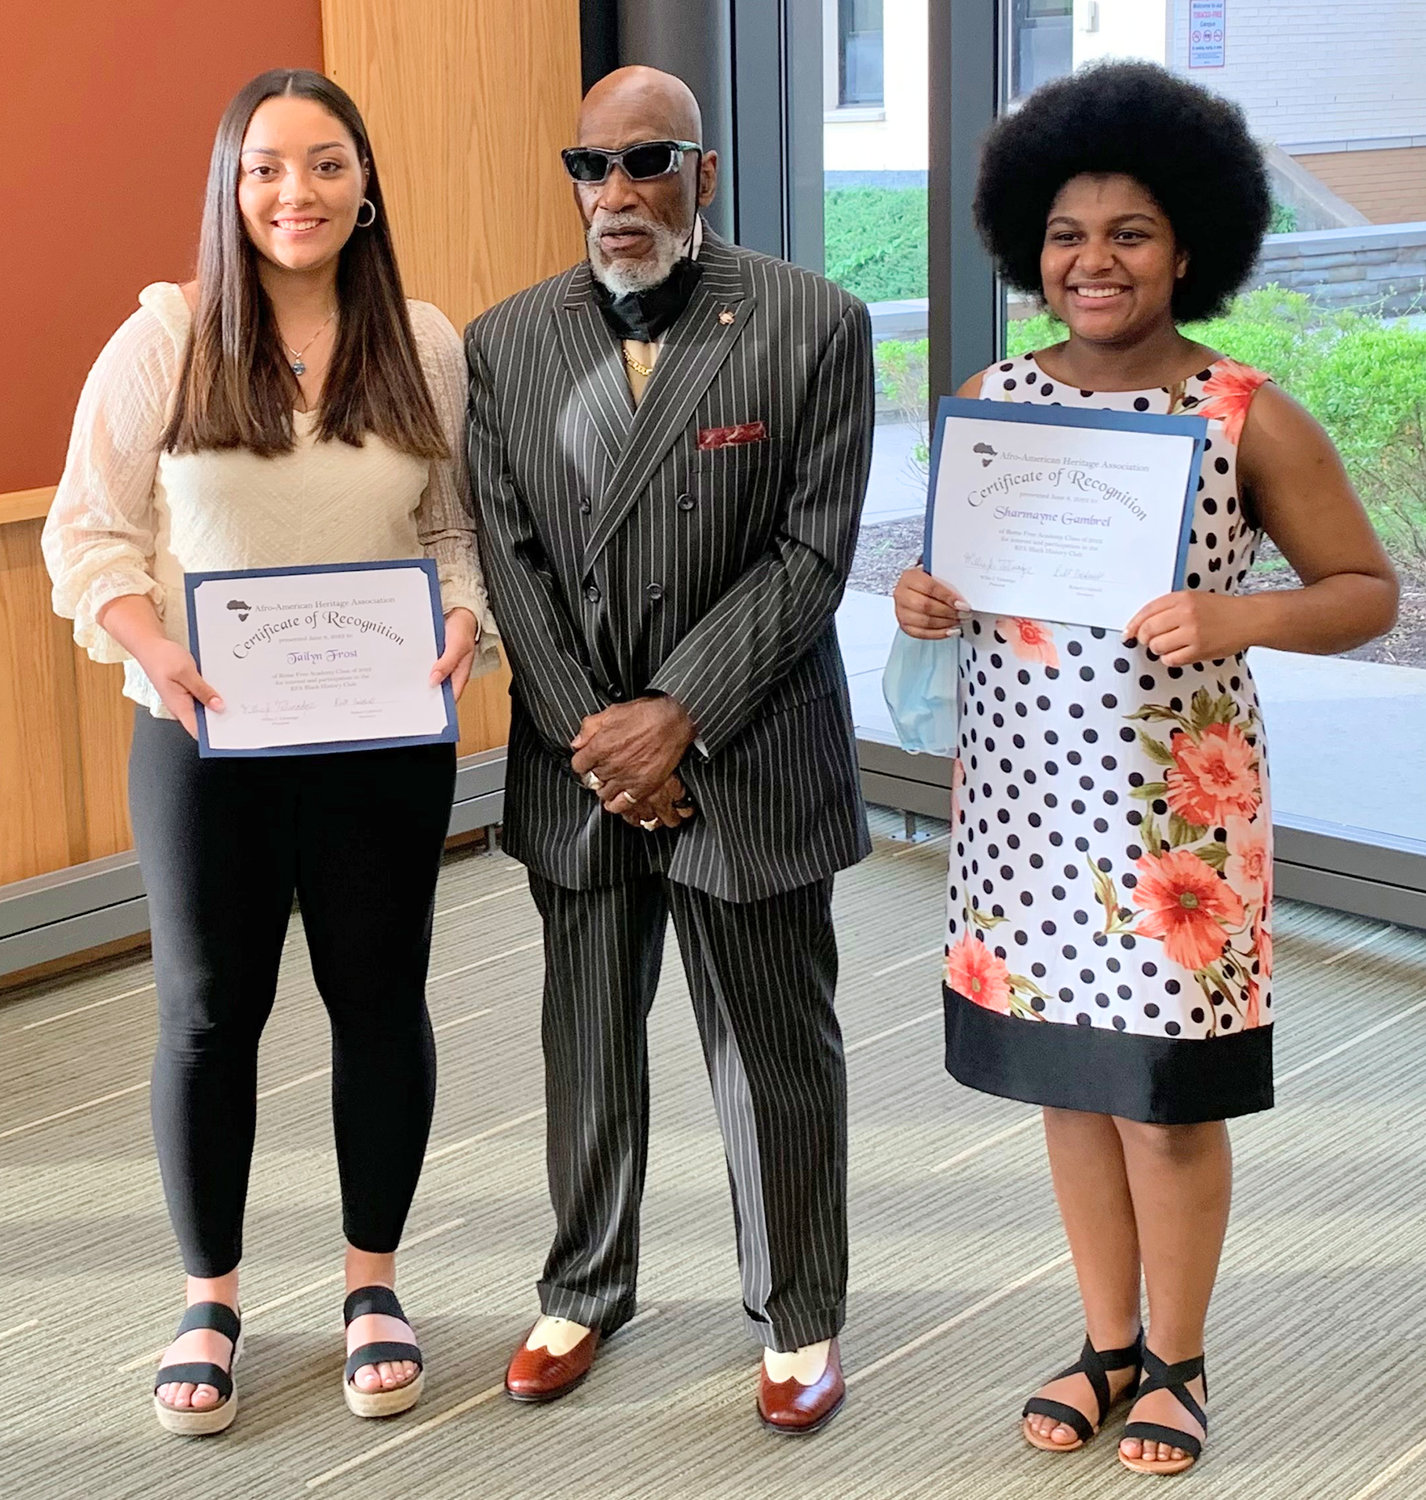 Afro-American Heritage Association President Willie Talmadge presented Tailyn Frost, left, and Sharmayne Gambriel, right, with scholarships during the Rome Branch NAACP annual High School Senior Recognition Night ceremony. (Photos submitted)